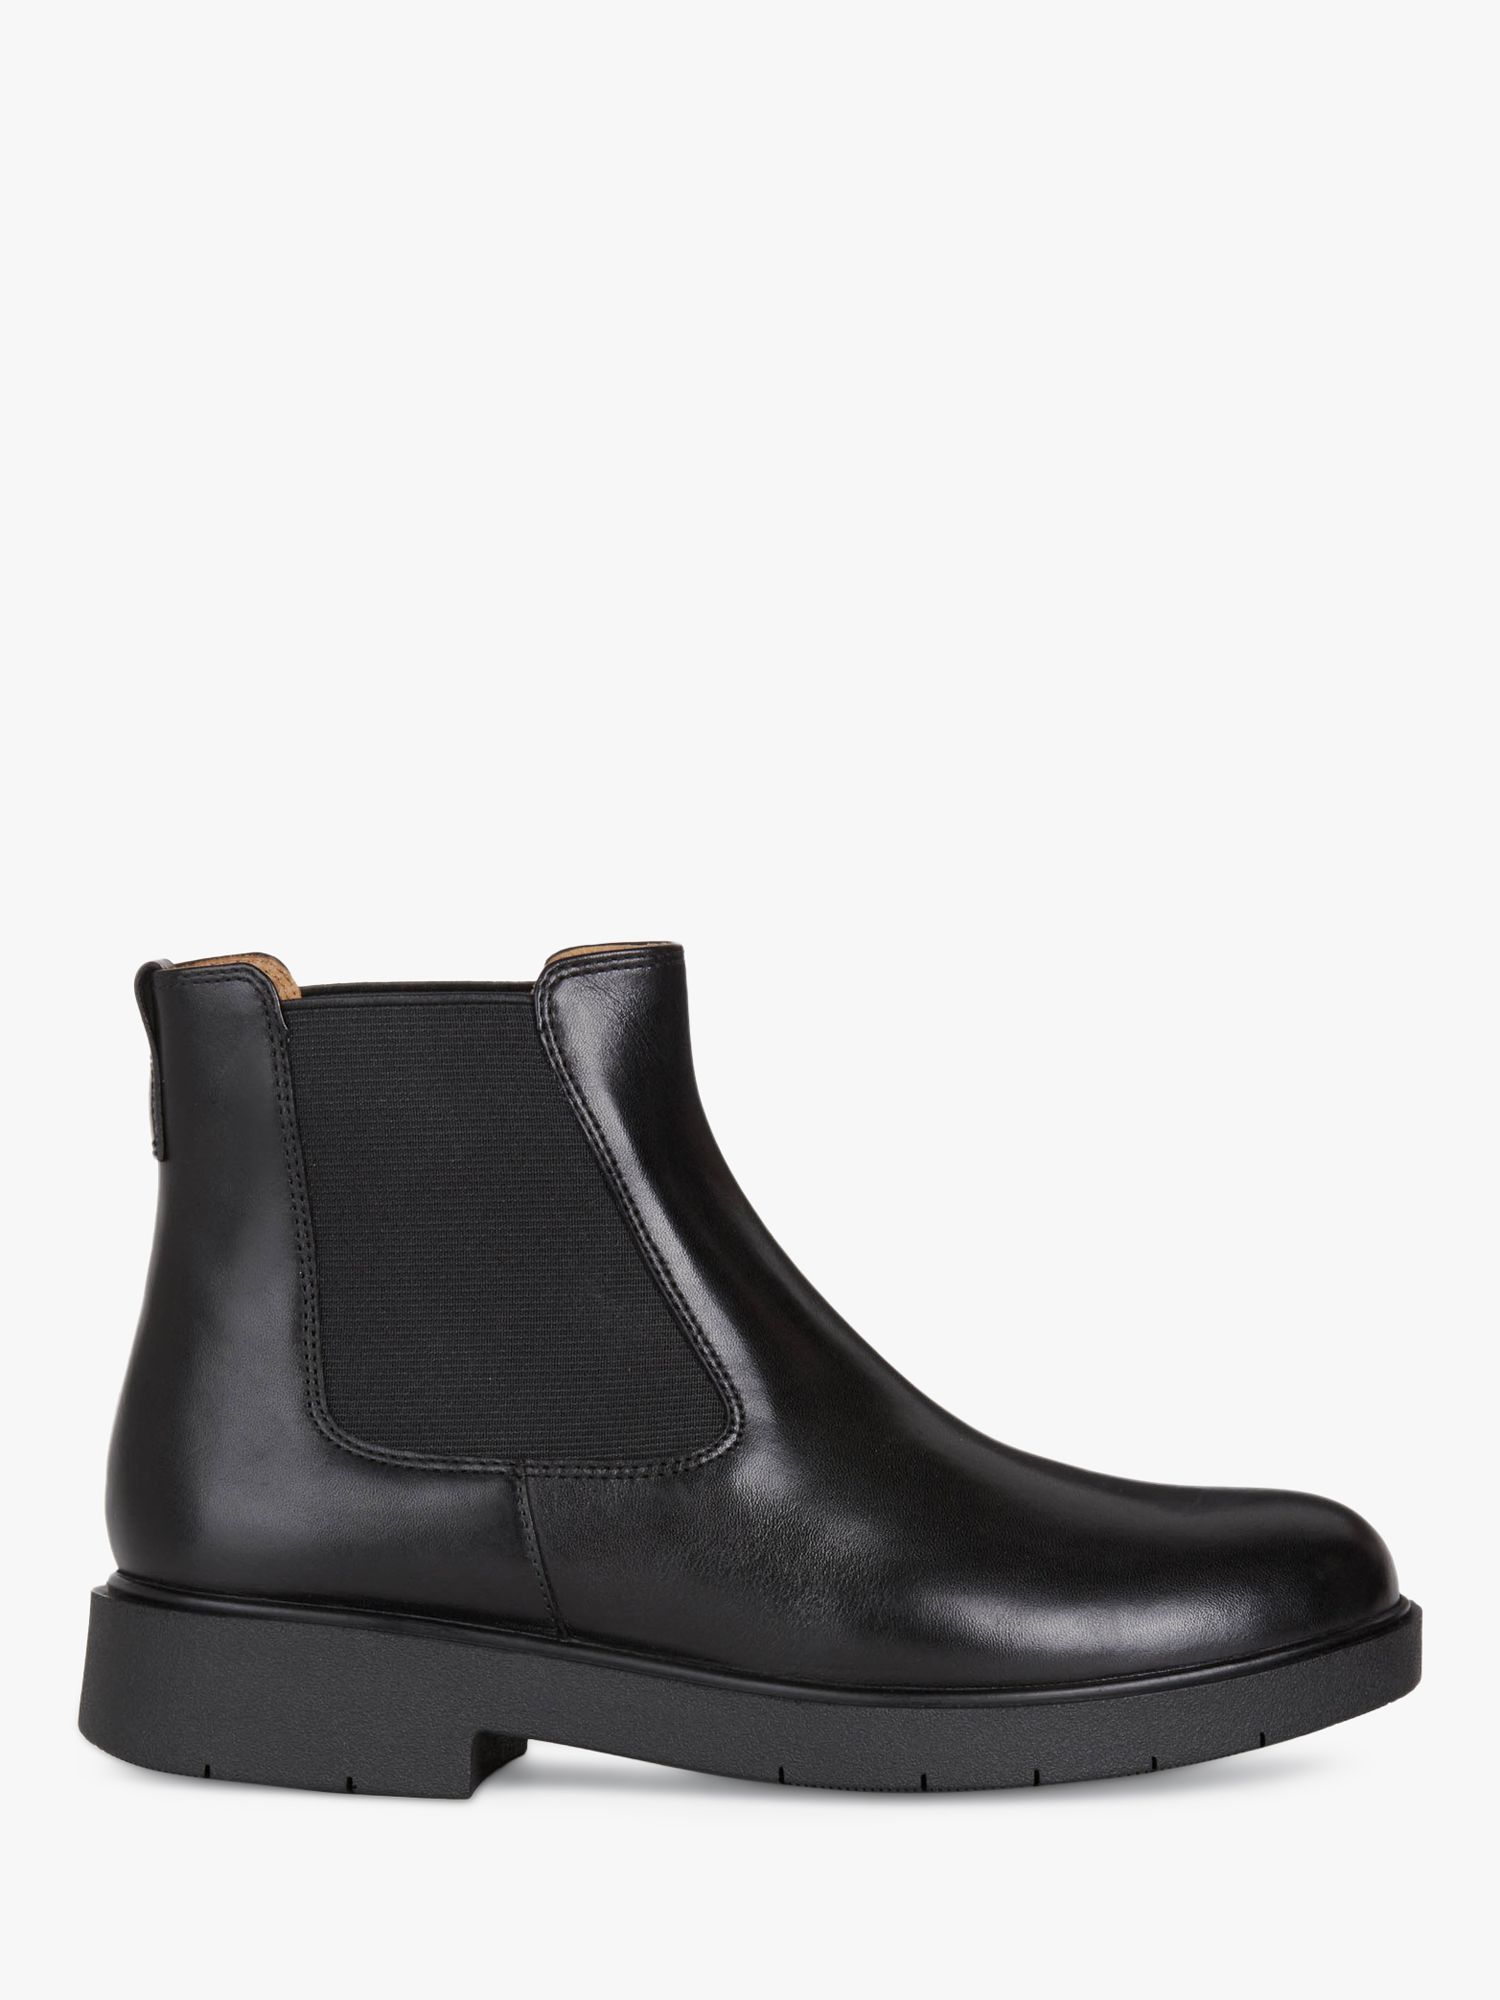 Geox D Spherica EC1 Wide Fit Leather Ankle Boots, Black at John Lewis ...